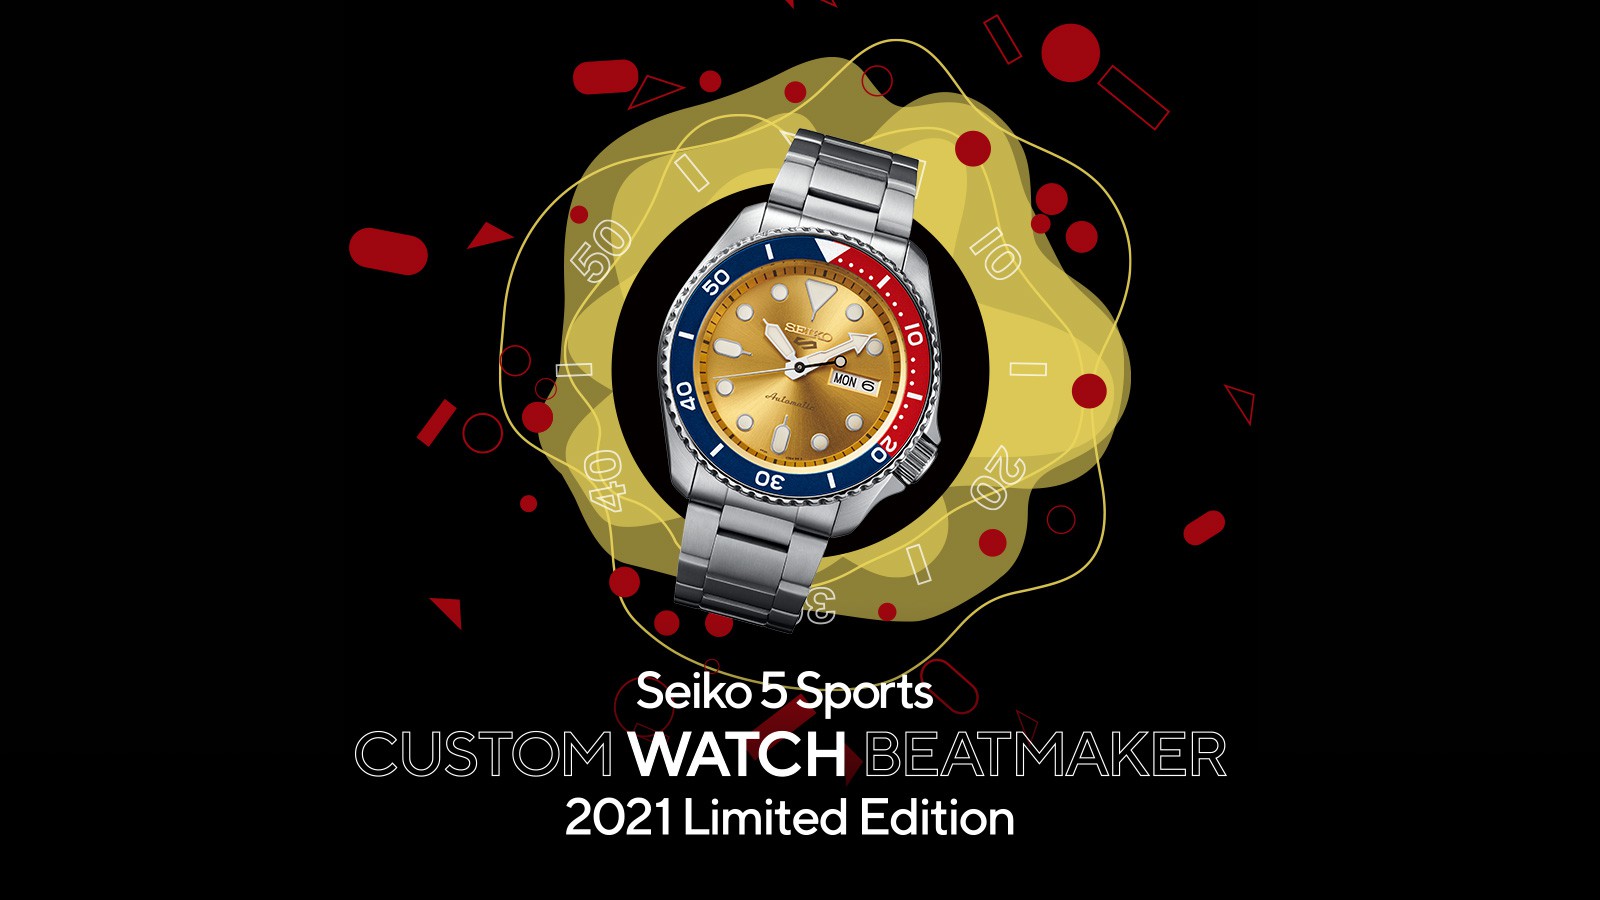 The winning watch from the CUSTOM WATCH BEATMAKER campaign joins the Seiko  5 Sports collection. | Seiko Watch Corporation